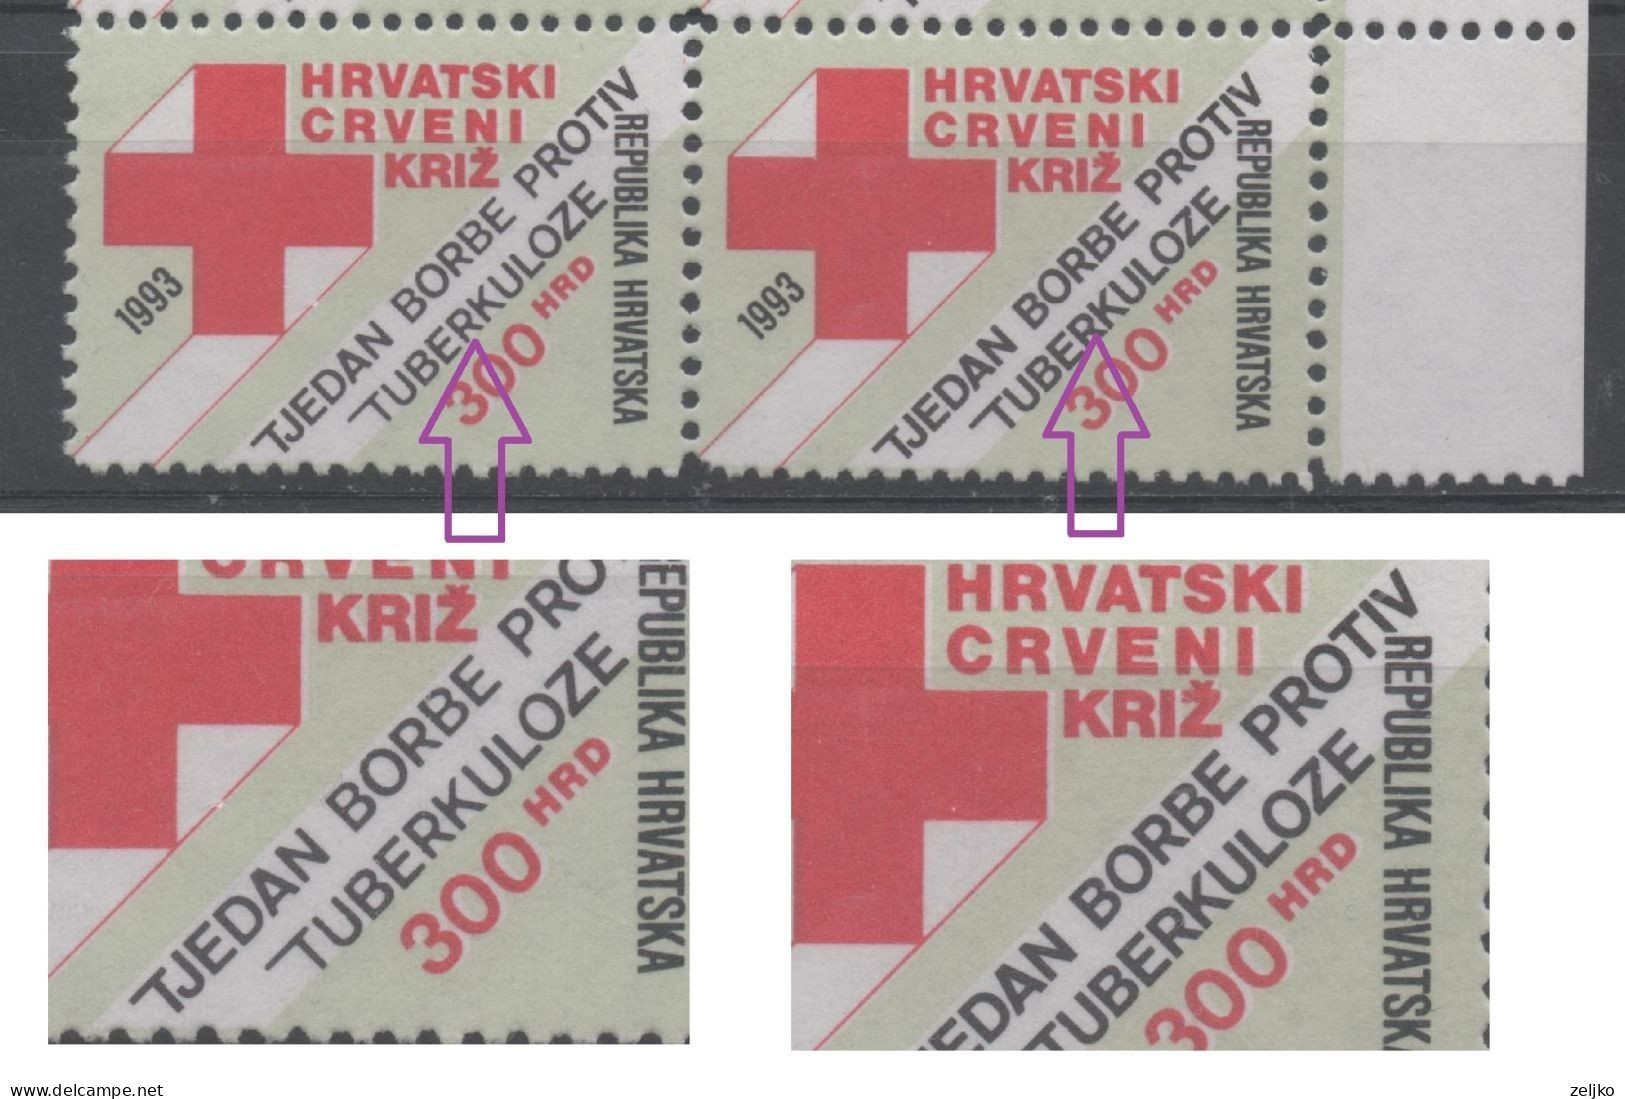 Croatia, Error, 1993, MNH, Michel 30, Difference In Thickness Of The Inscription, Red Cross - Croatie